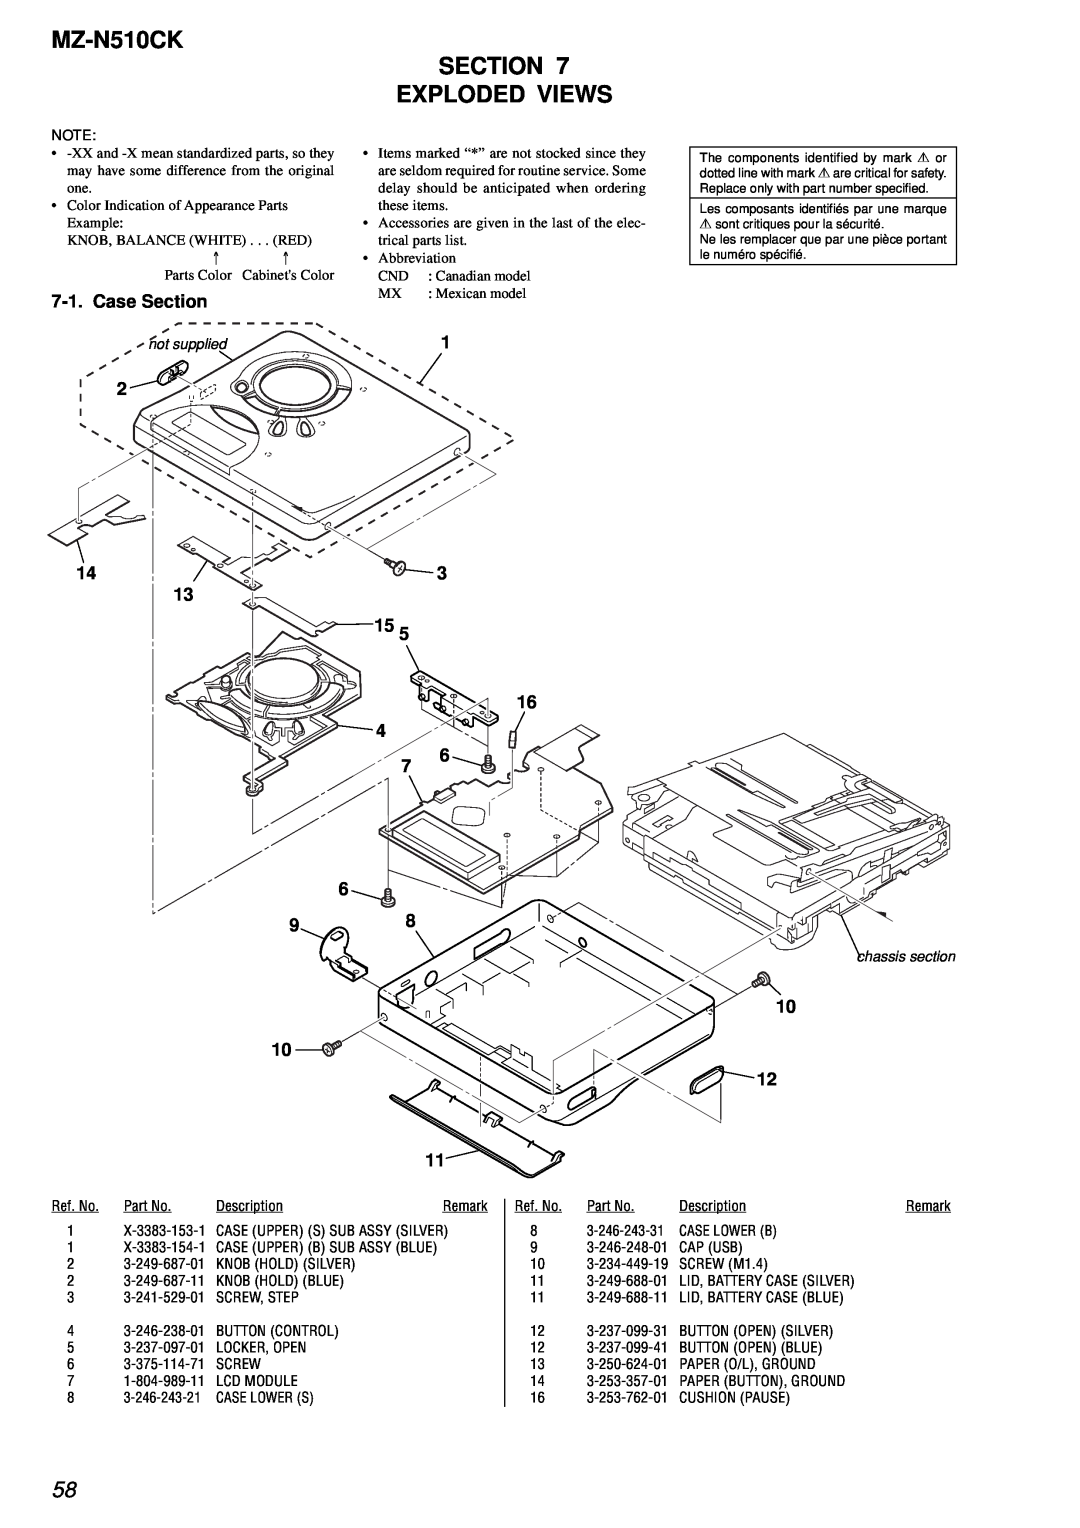 Sony service manual MZ-N510CK SECTION EXPLODED VIEWS, Case Section, 15 4 